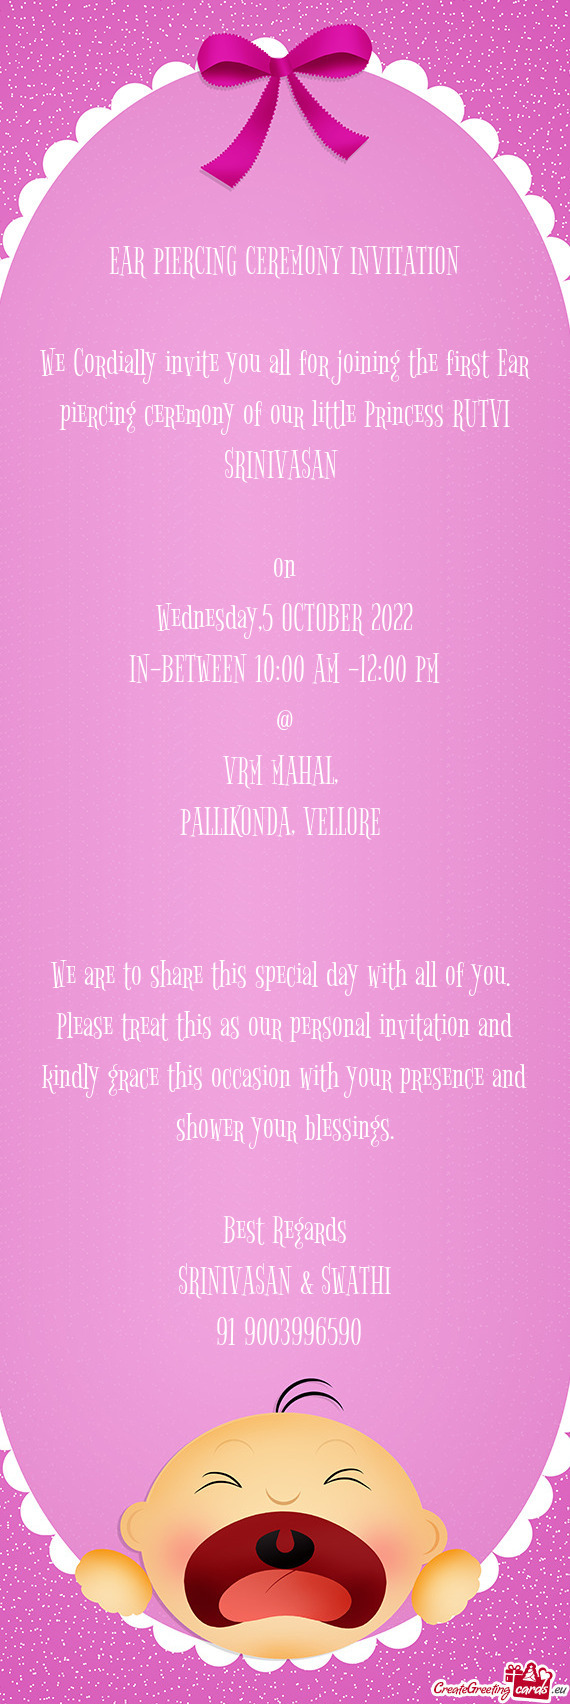 We Cordially invite you all for joining the first Ear piercing ceremony of our little Princess RUTVI